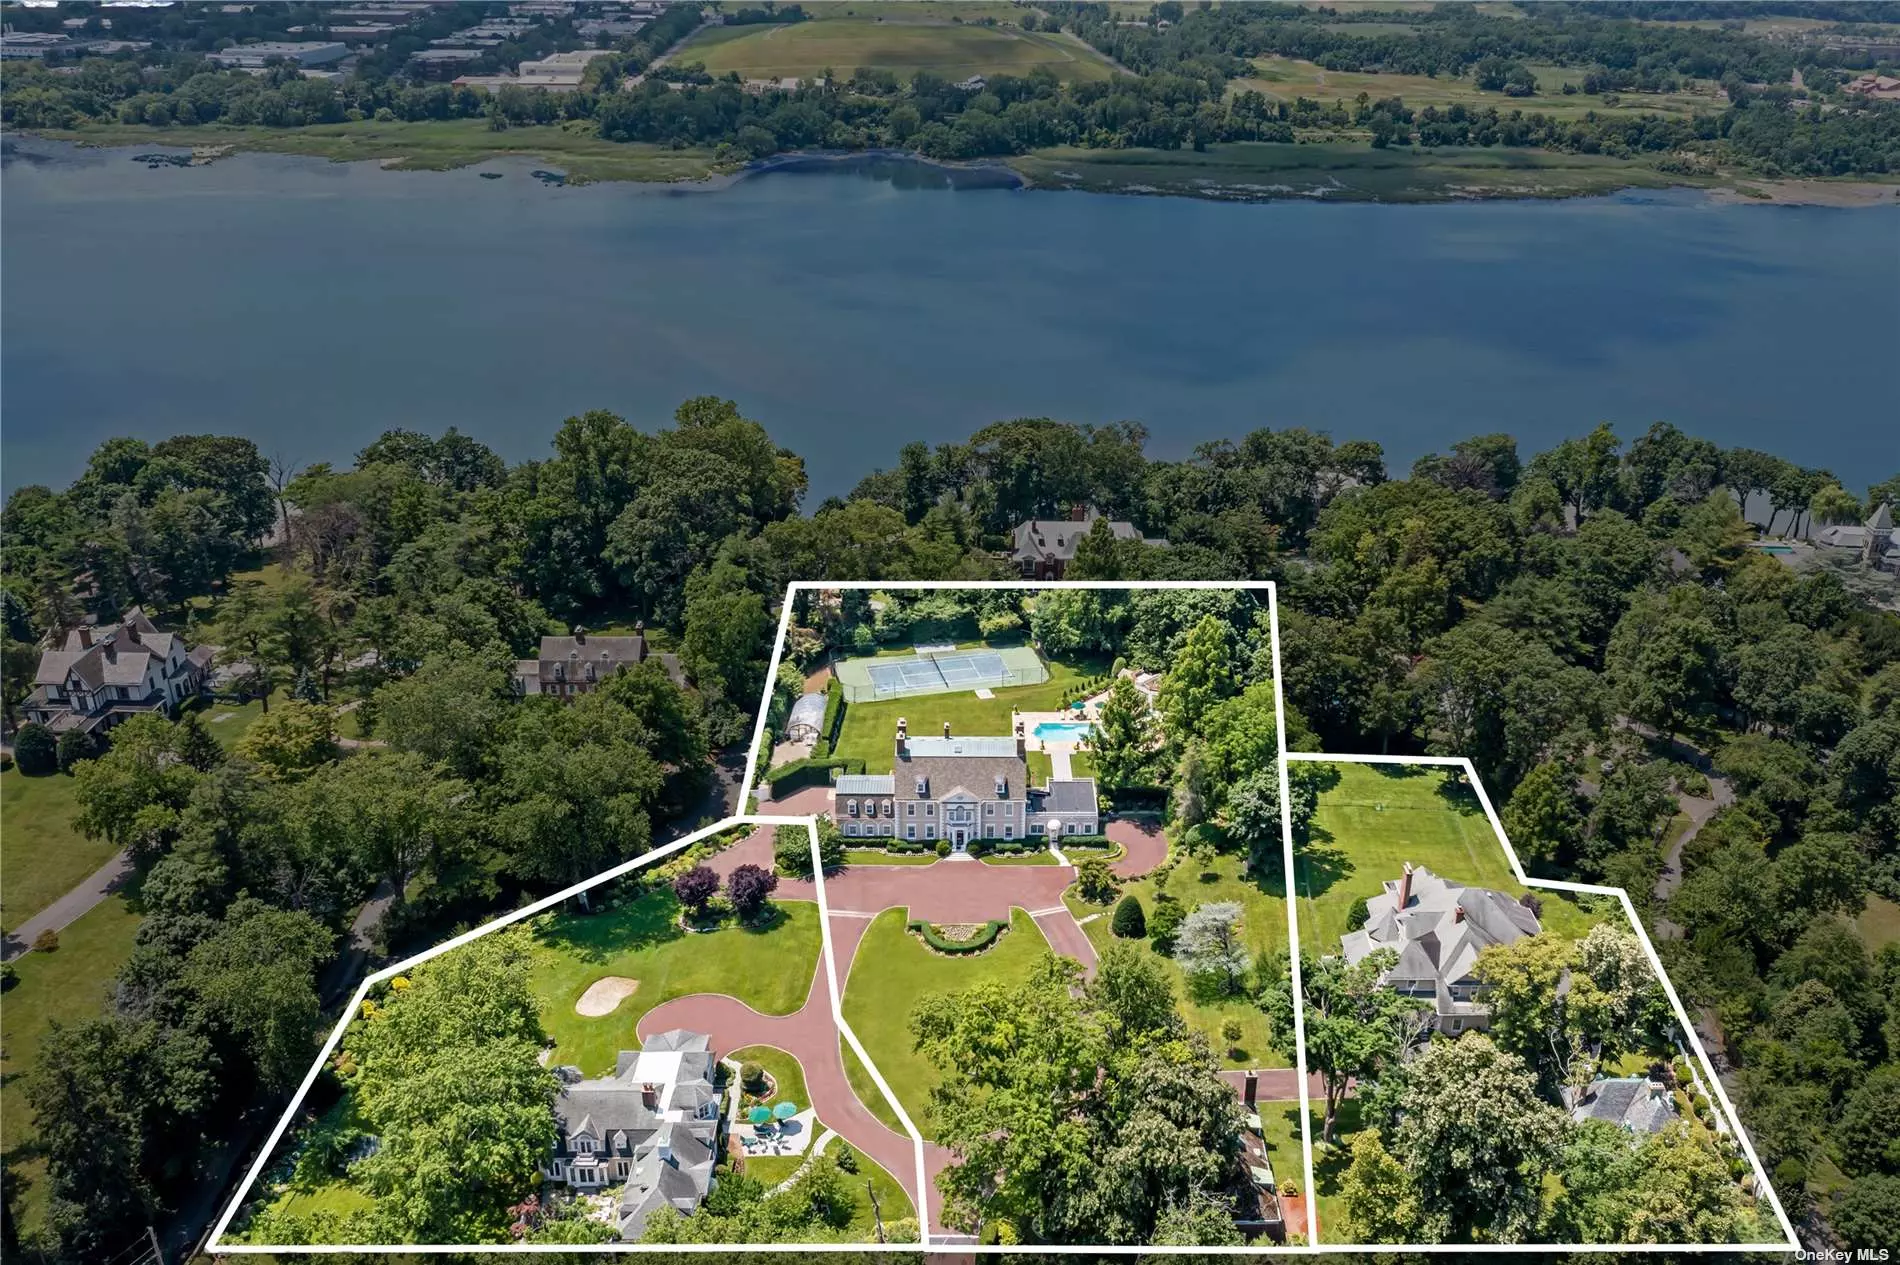 Want to live in a home as rich in history as it is beautiful? This gorgeous compound on the North Shore of Long Island has it all. This one in a million property, which has been under the same ownership for 50 years, boasts 3 separate homes, a coach house and a gate house, a pool and a tennis court, all enclosed by a privacy wall and an electric gate. Once inside, the property feels like an oasis. The 7, 500 Sq.Ft. Main Residence encompasses 9 bedrooms, 7.5 bathrooms and exudes elegance from every detail of the home. House #2 is a beautiful 6-bedroom Colonial featuring hardwood floors, a stately step-down living room/ dining room combination with mirroring fireplaces and a large Primary Suite with dual walk-in-closets. Completed in 2003, House #3 is a 6 bedroom, 6, 400 Sq.Ft. Colonial with tall ceilings, an oversized eat-in-kitchen that opens up to a spacious entertainment room with French doors leading out to a covered patio, allowing for effortless living and flow. All completed homes have full-house generators, attached garages and full/ finished basements. The two other buildings include The Coach House and The Gate House, which was constructed by Frederick Law Olmsted, the lead landscape architect for Central Park in Manhattan. Situated in an incredible location, the compound is only 26-miles from Manhattan, and enjoys winter water views. This unparalleled home is perfectly positioned between the Long Island Sound and the heart of The Village of Roslyn, with close proximity to the best of the North Shore including luxe shopping, high-end eateries and world-renowned golf courses such as Engineers Country Club and North Shore Golf Club.